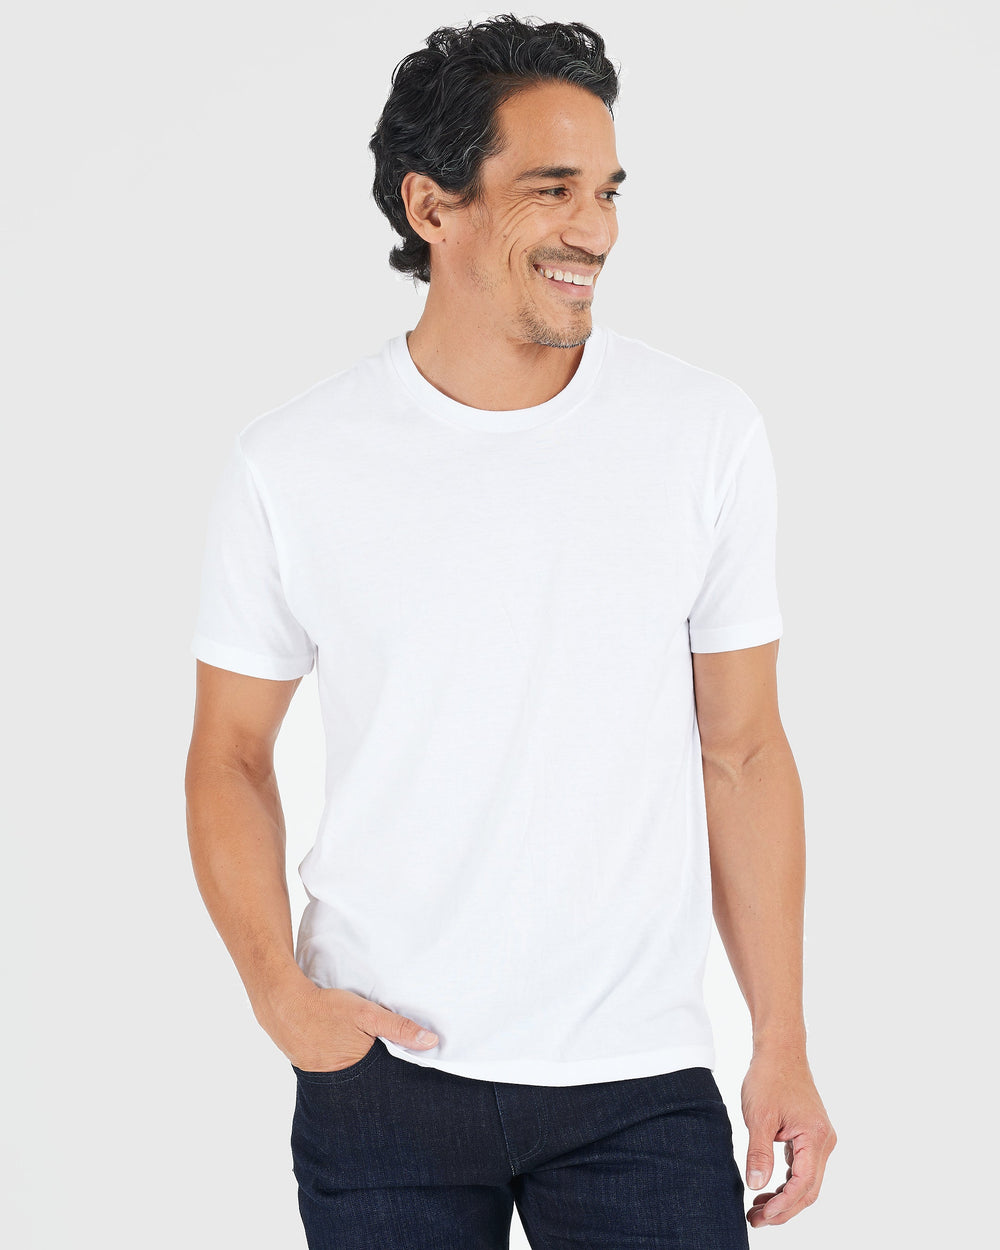 Black and White Classic Crew Neck Short Sleeve 10-Pack